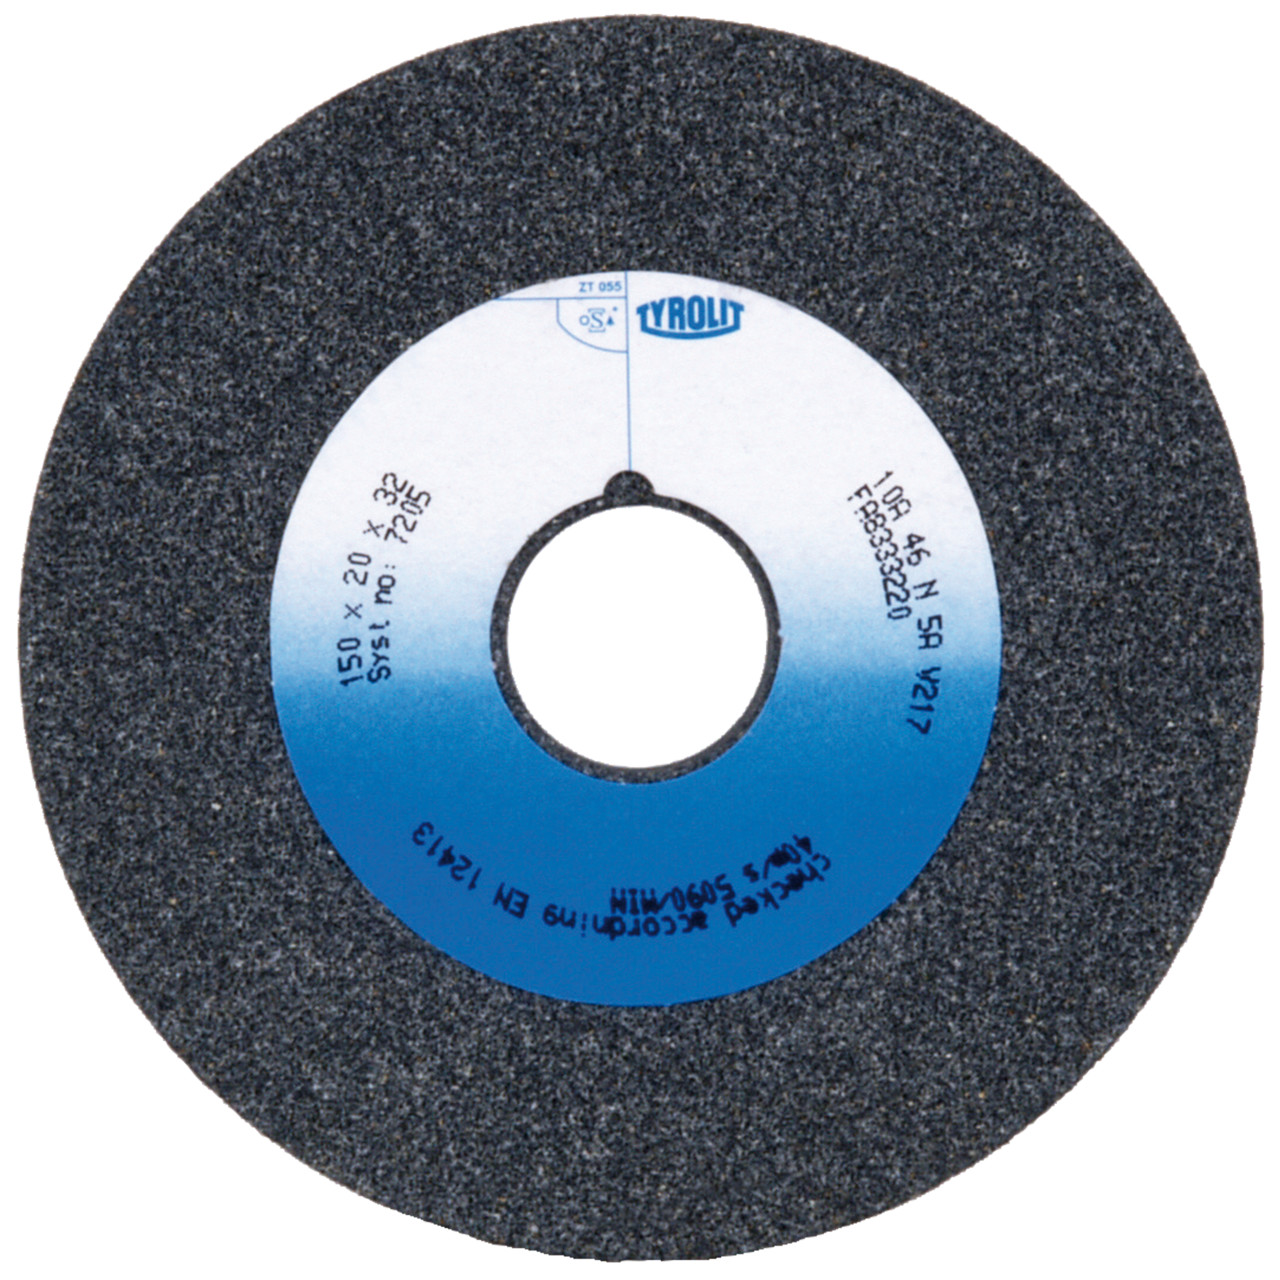 TYROLIT conventional ceramic grinding wheels DxDxH 250x32x32 For unalloyed and low-alloy steels, shape: 1, Art. 3538